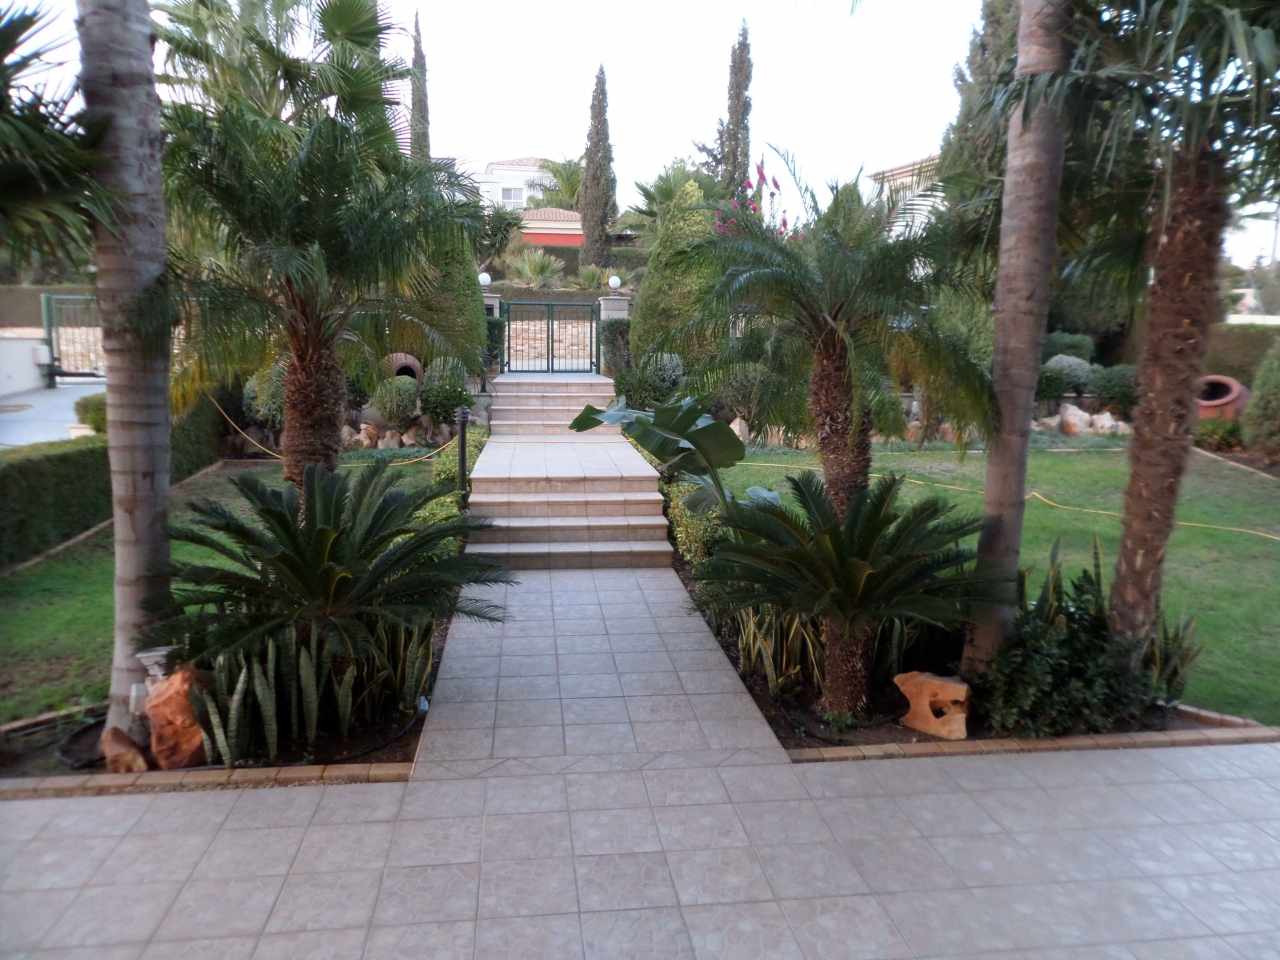 Property for Sale: House (Detached) in Sfalagiotissa, Limassol  | Key Realtor Cyprus